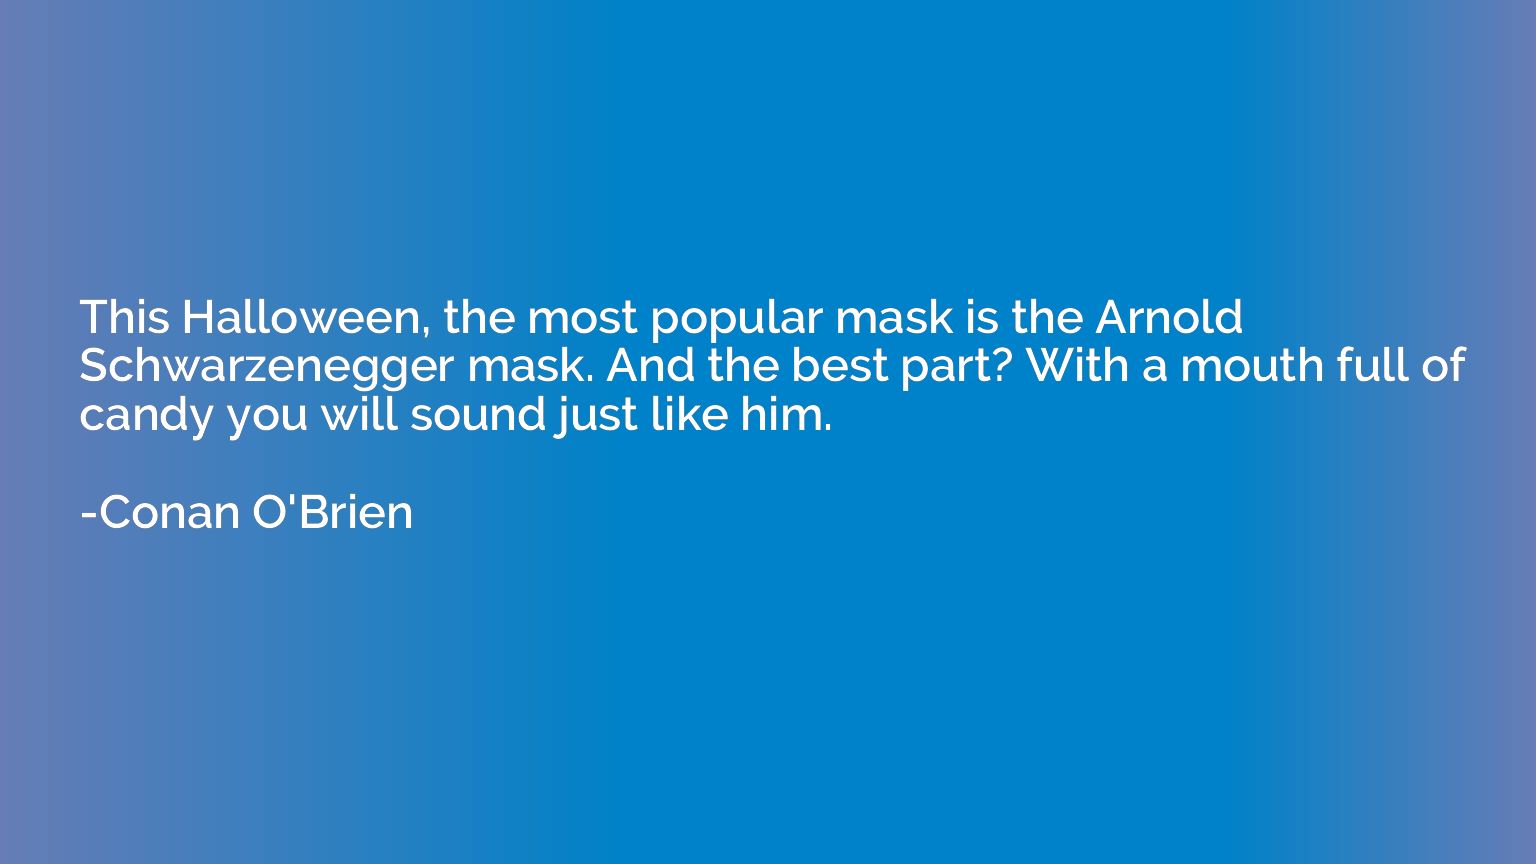 This Halloween, the most popular mask is the Arnold Schwarze